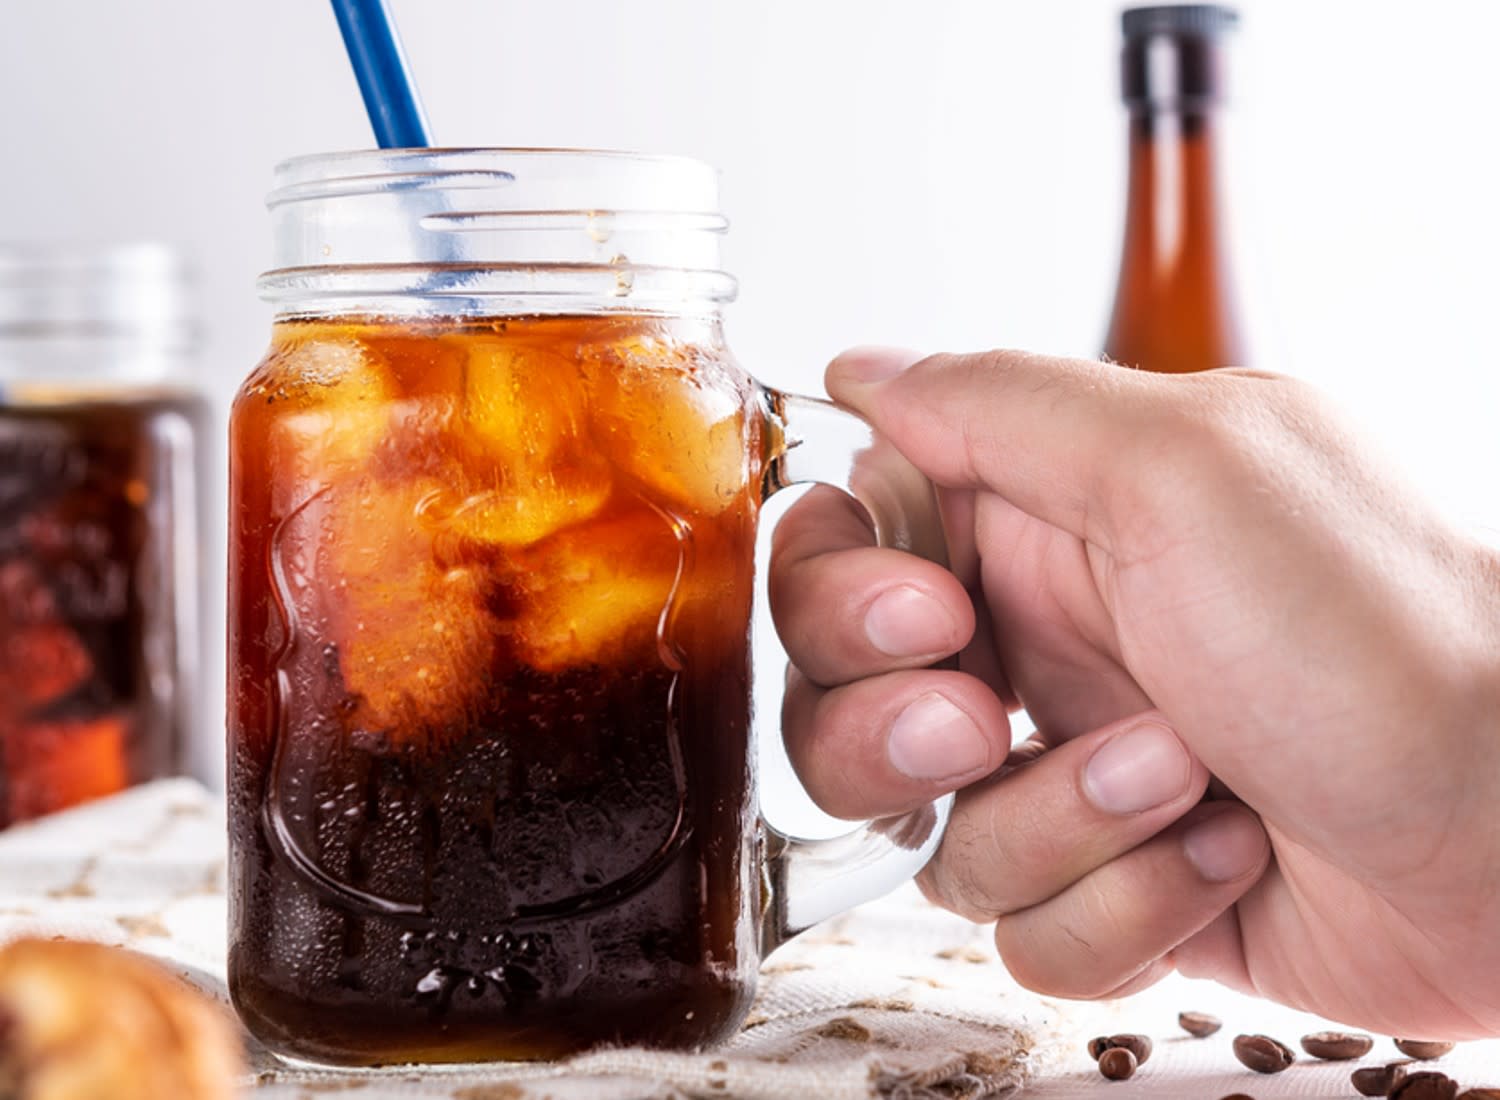 How to make Cold Brew Coffee Fast